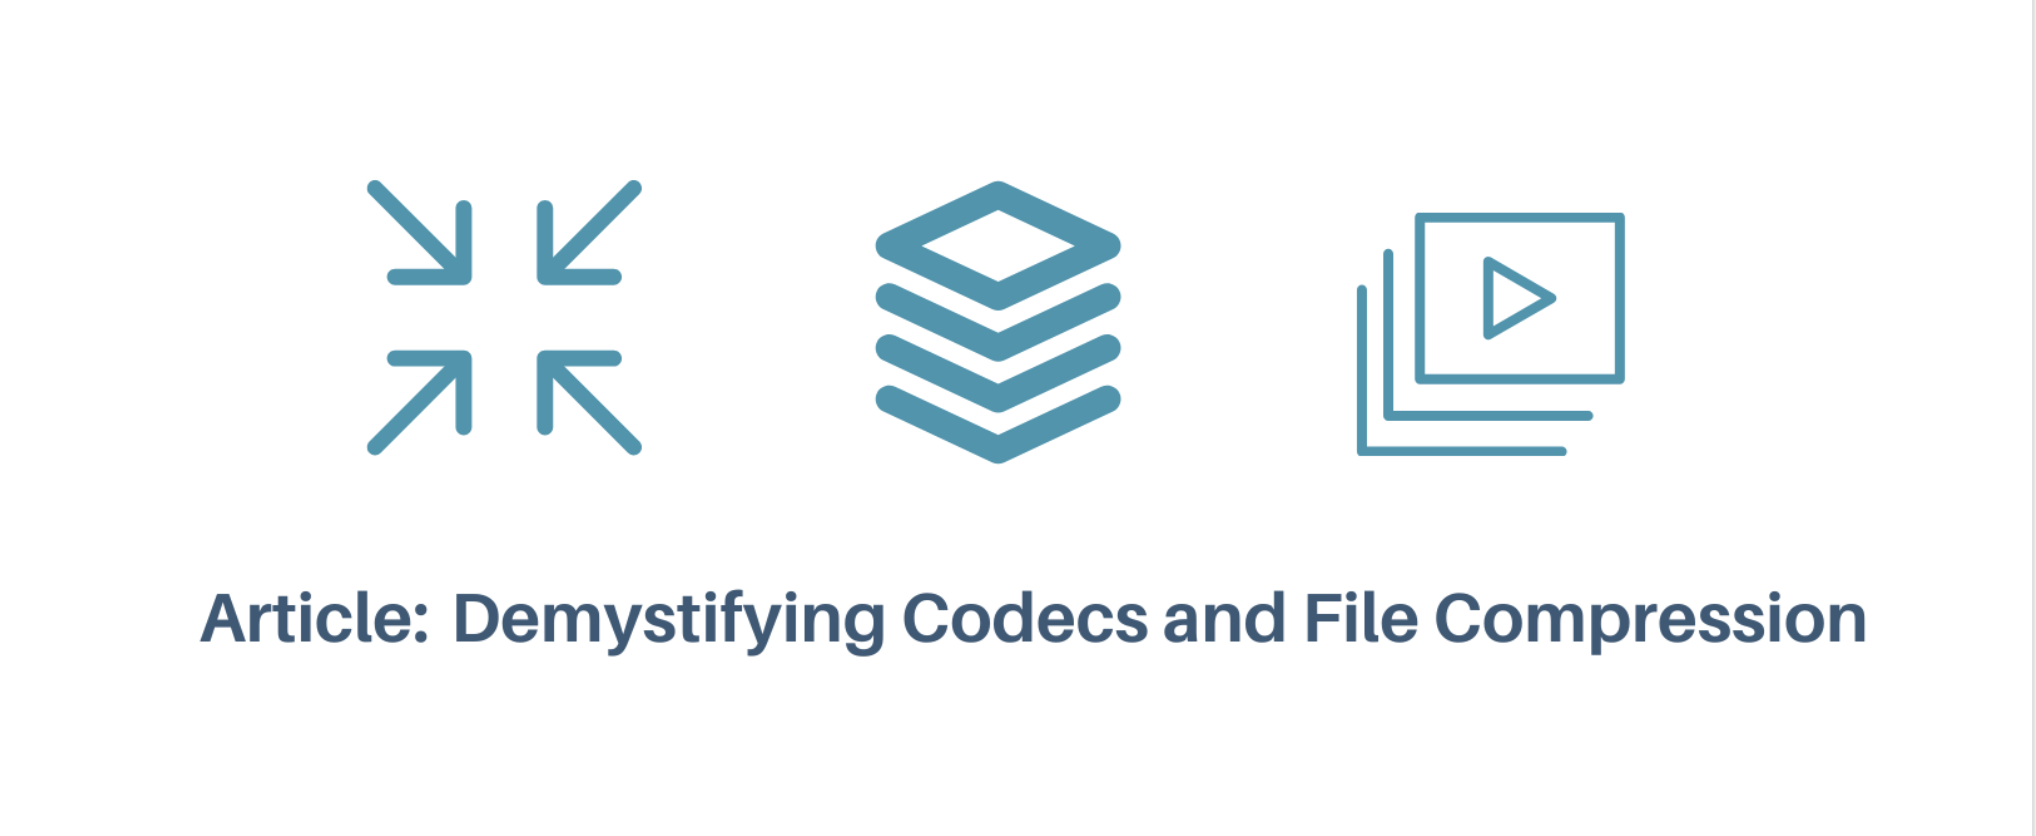 ARTICLE: DEMYSTIFYING CODECS AND FILE COMPRESSION